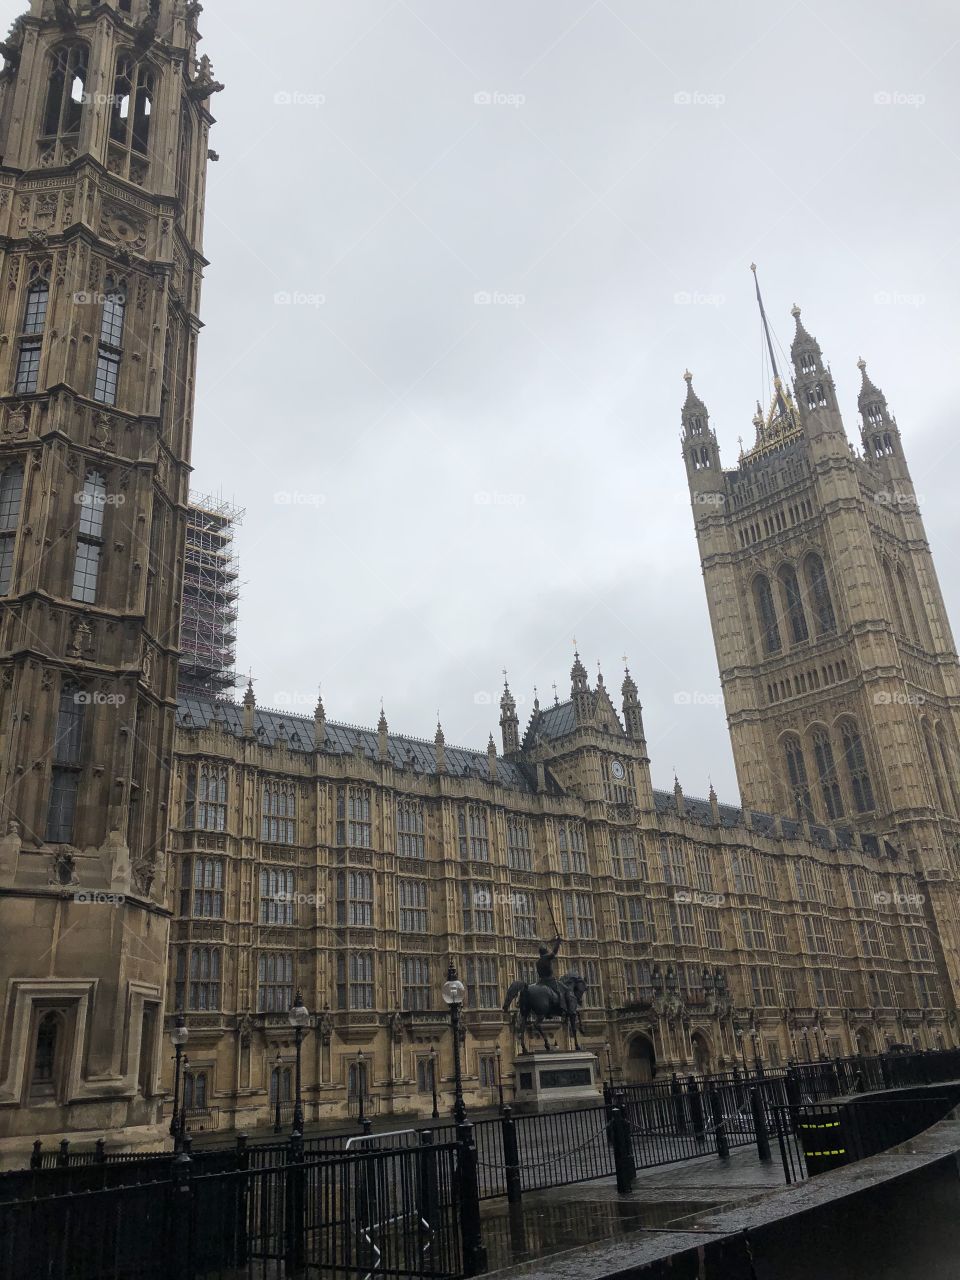 A closeup picture of Houses of Parliament in London, England on a grey April morning. 